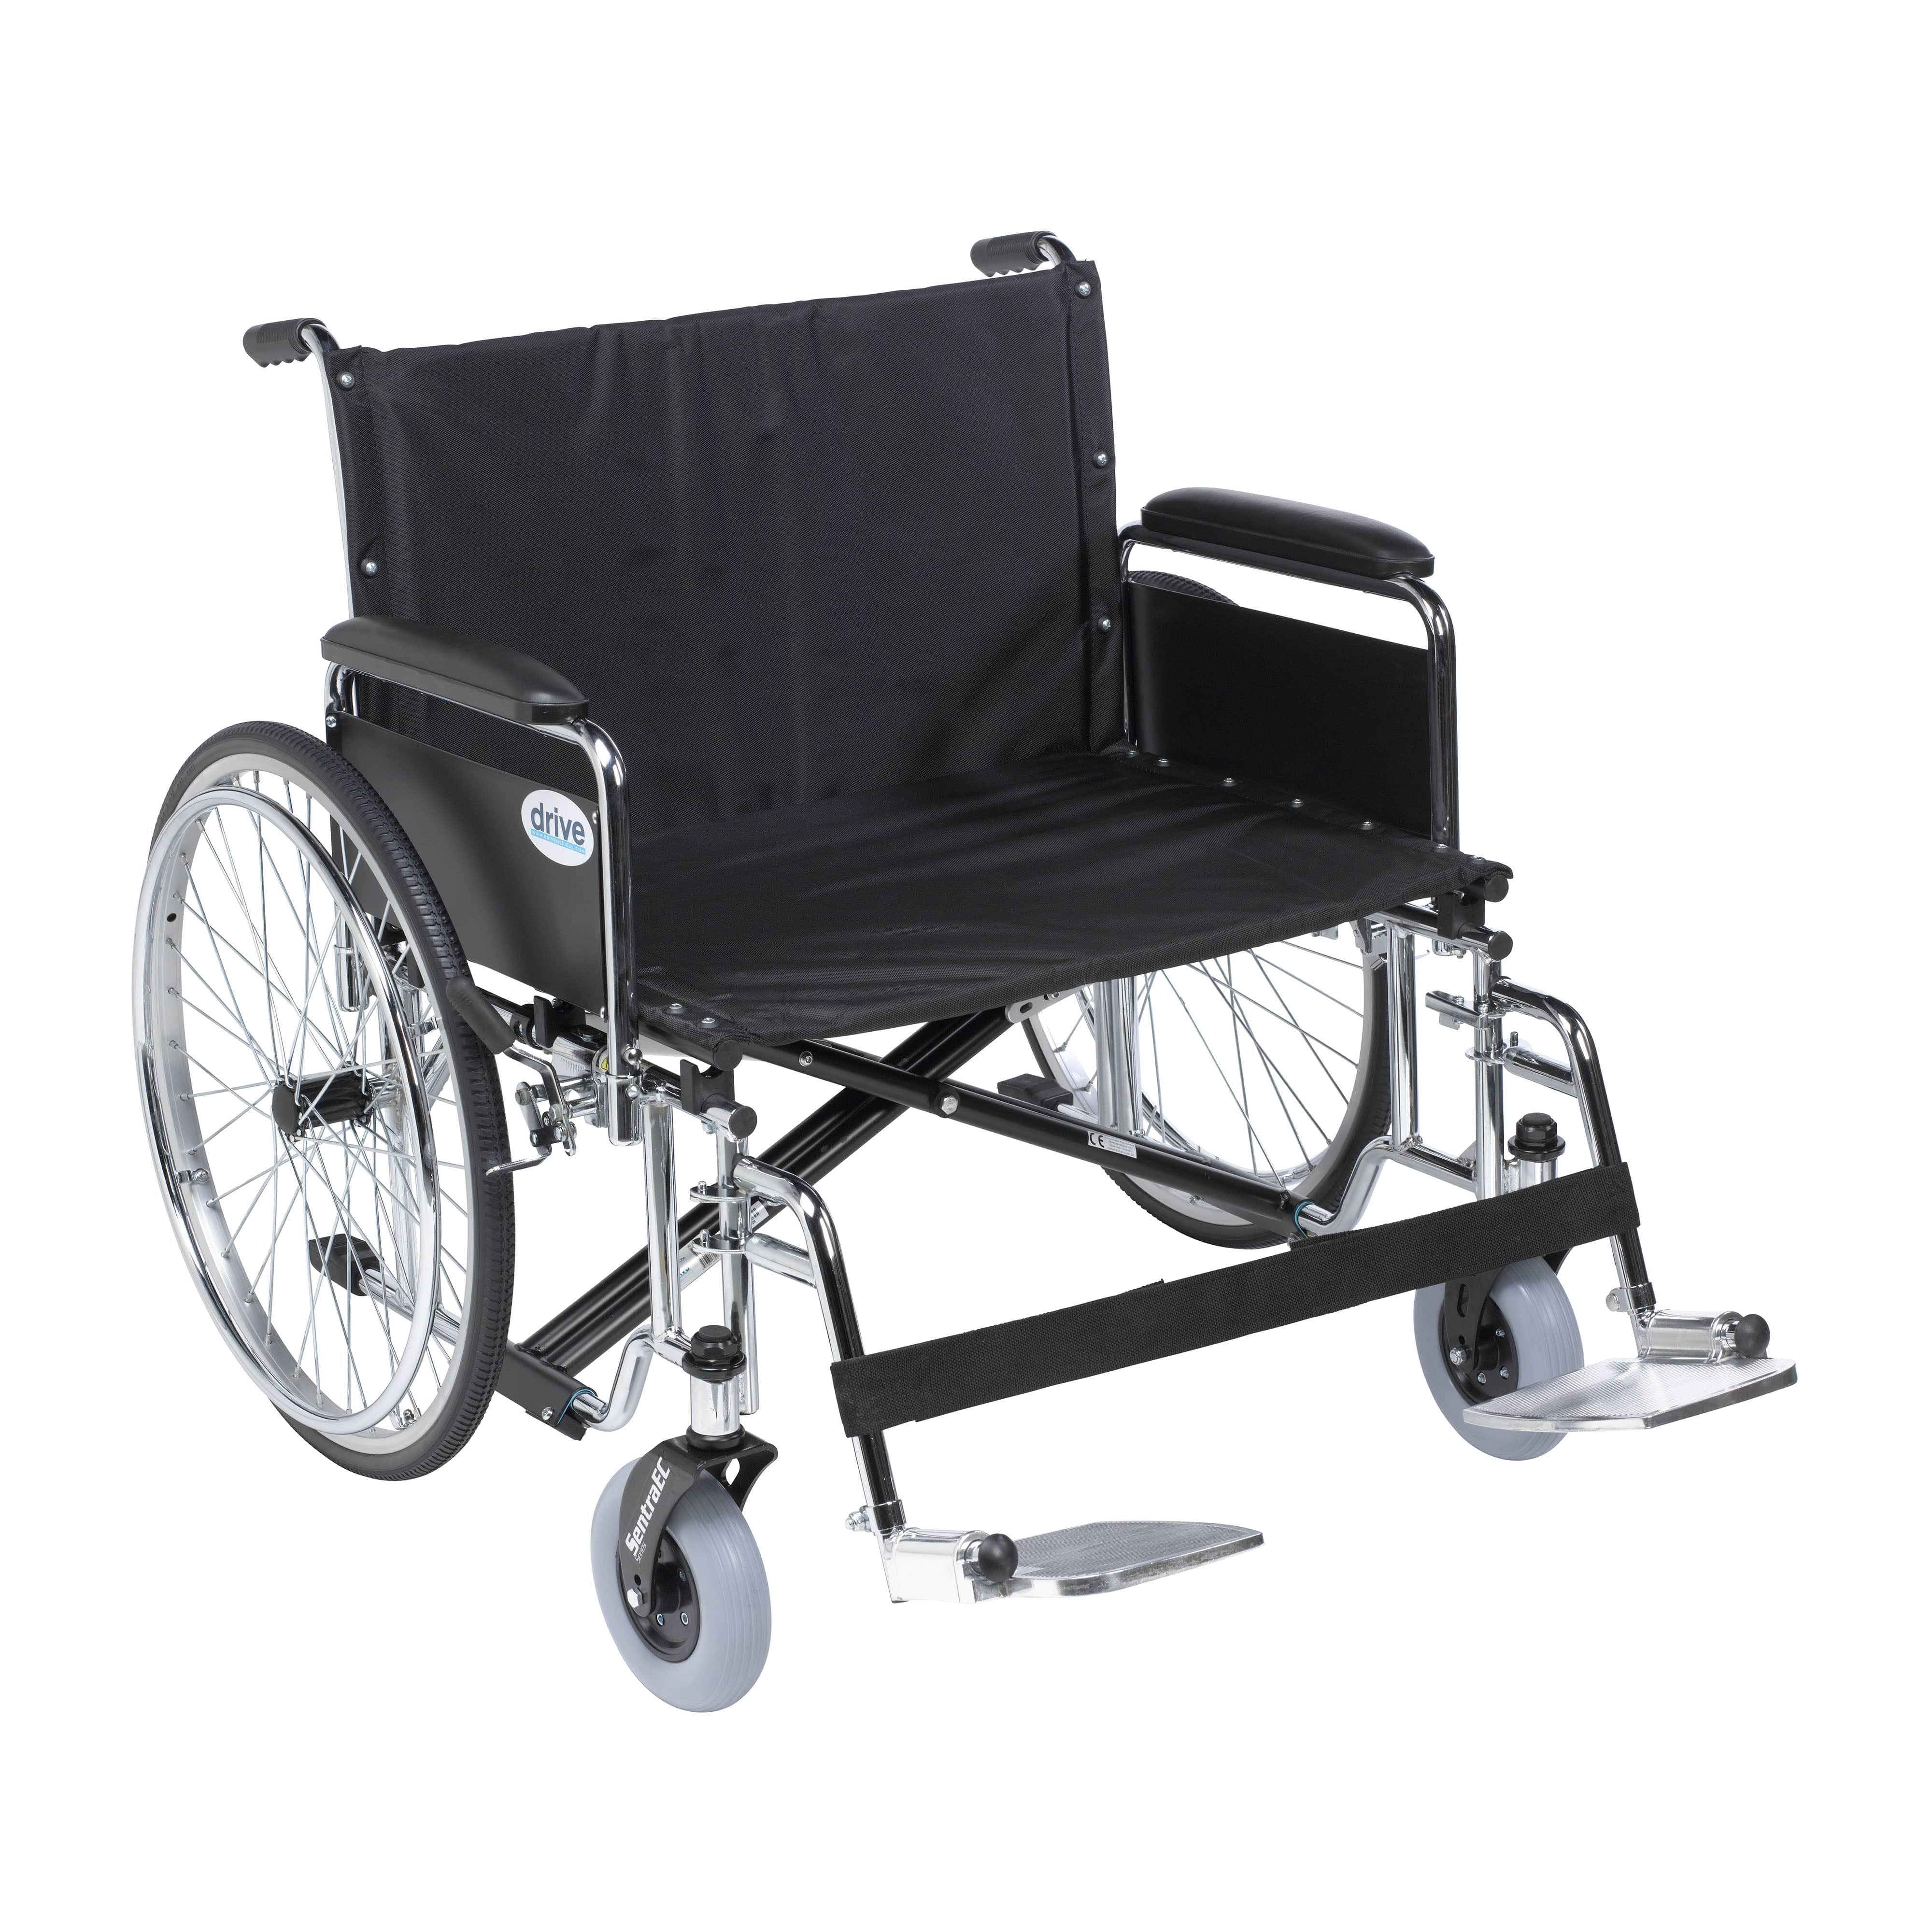 Drive Medical Wheelchairs/Heavy Duty Wheelchairs Detachable Full Arms and Swing Away Foot Rests / 28" Seat Drive Medical Sentra EC Heavy Duty Extra Wide Wheelchair